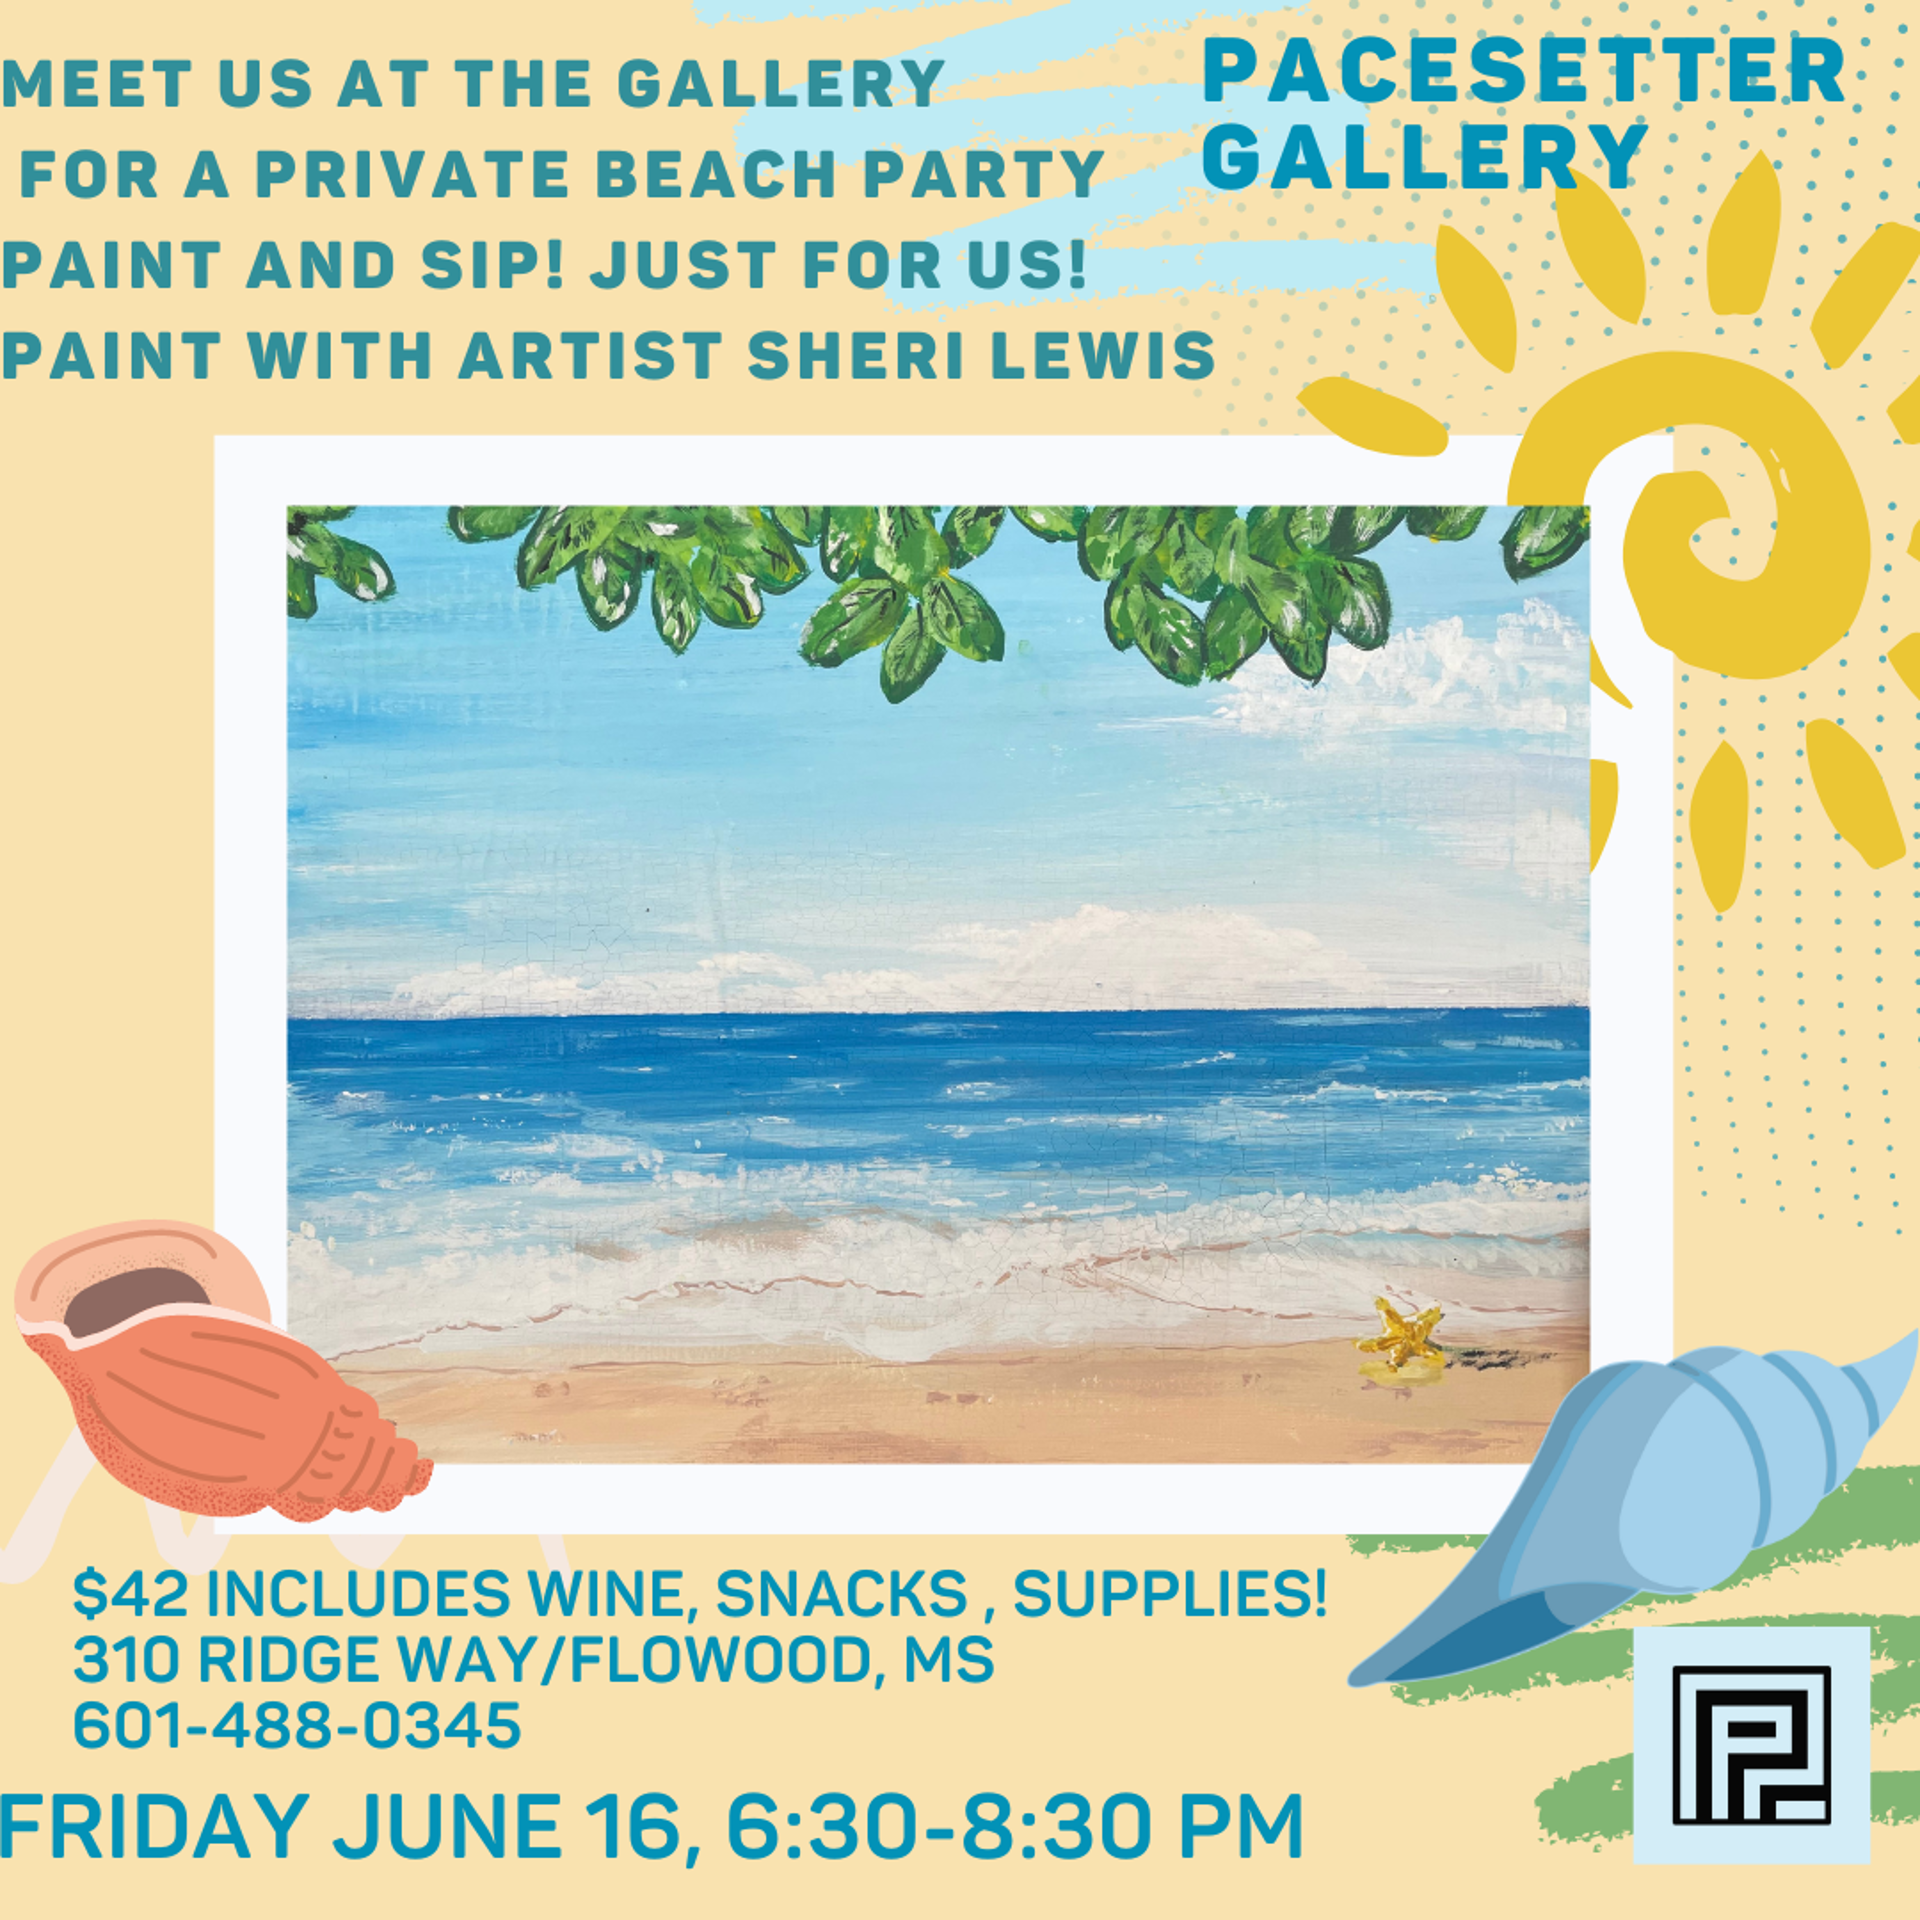 Private Beach Paint and Sip June 16 6:30 pm-8:30 pm by Pacesetter Merchandise